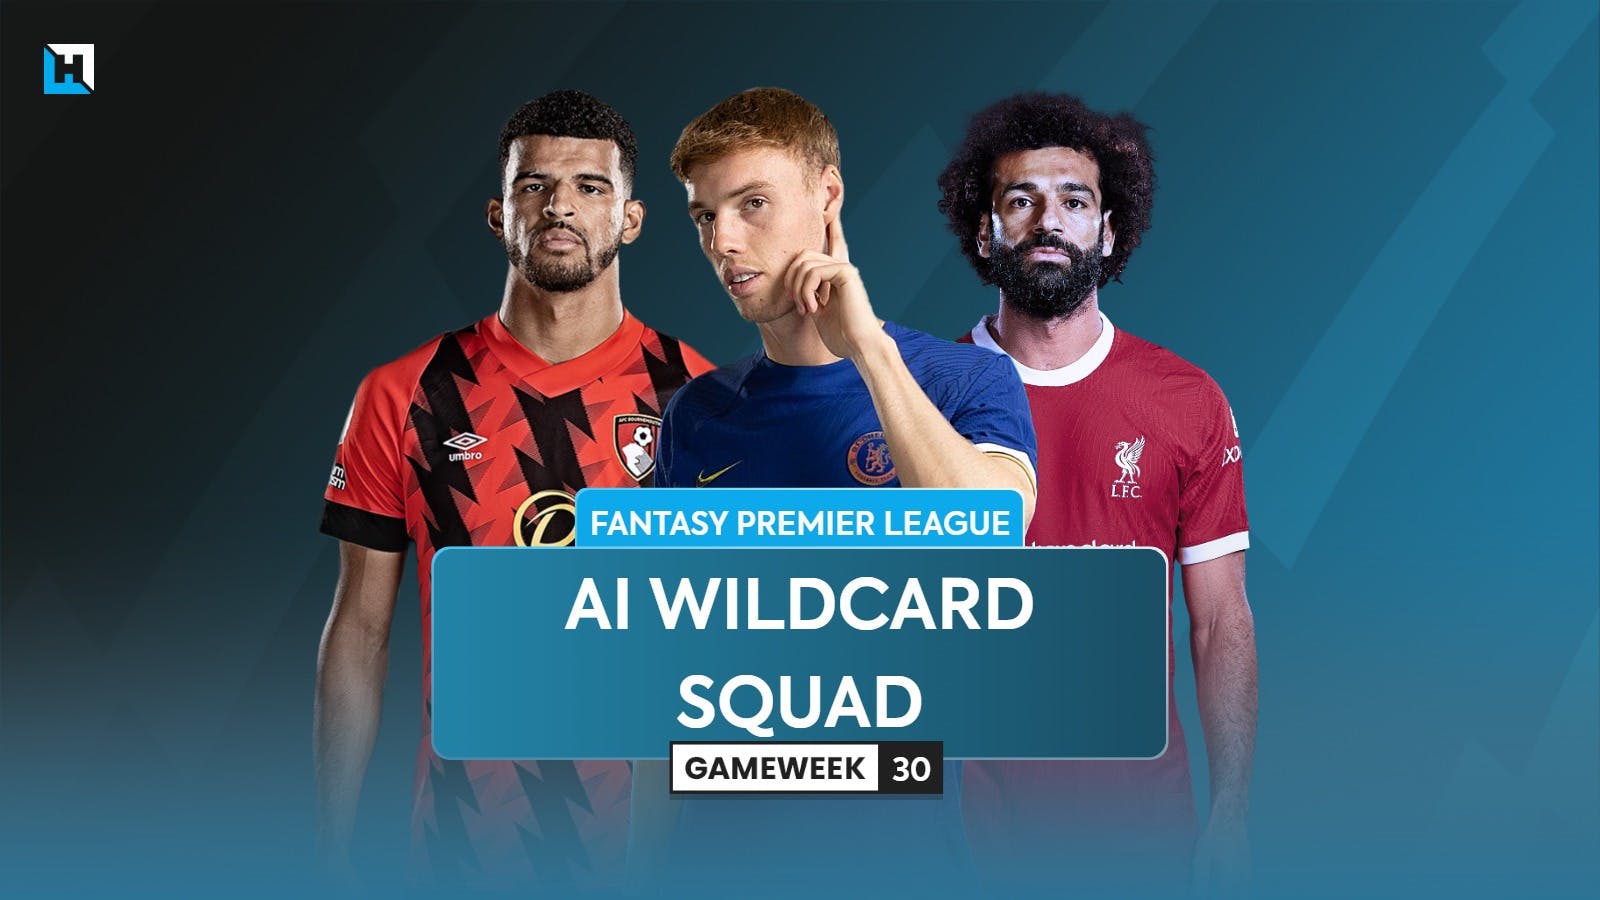 The best FPL Wildcard team for Gameweek 30 according to AI